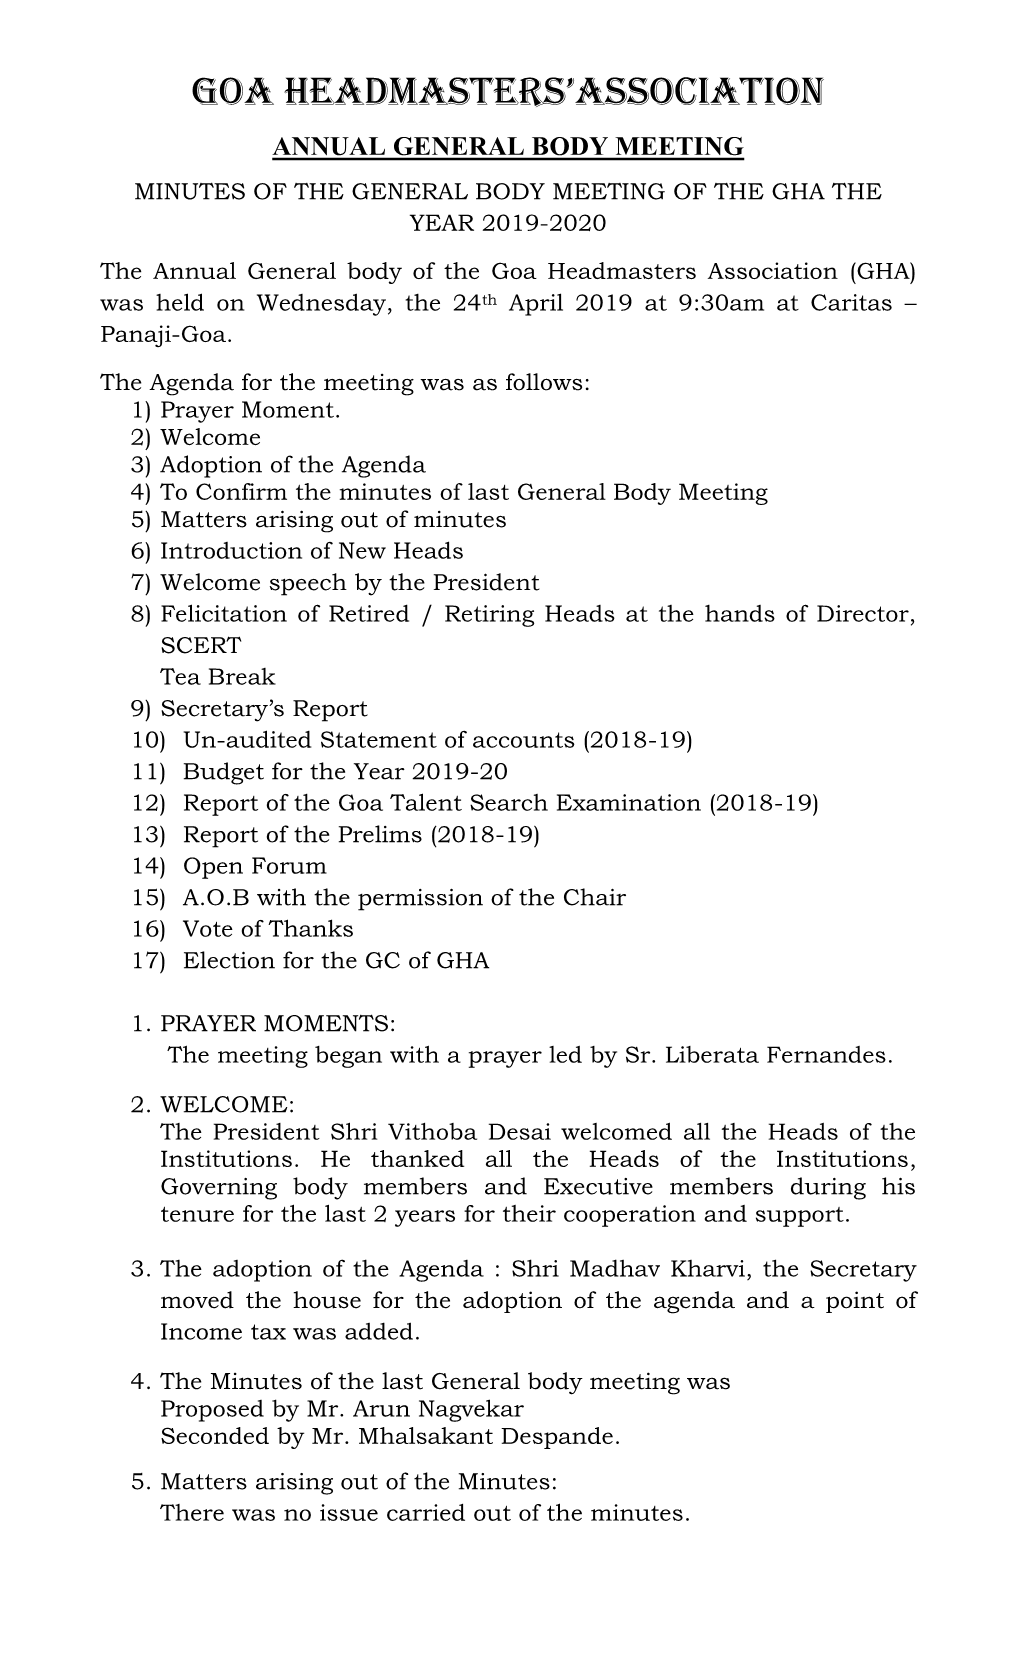 Annual General Body Meeting Minutes of the General Body Meeting of the Gha the Year 2019-2020